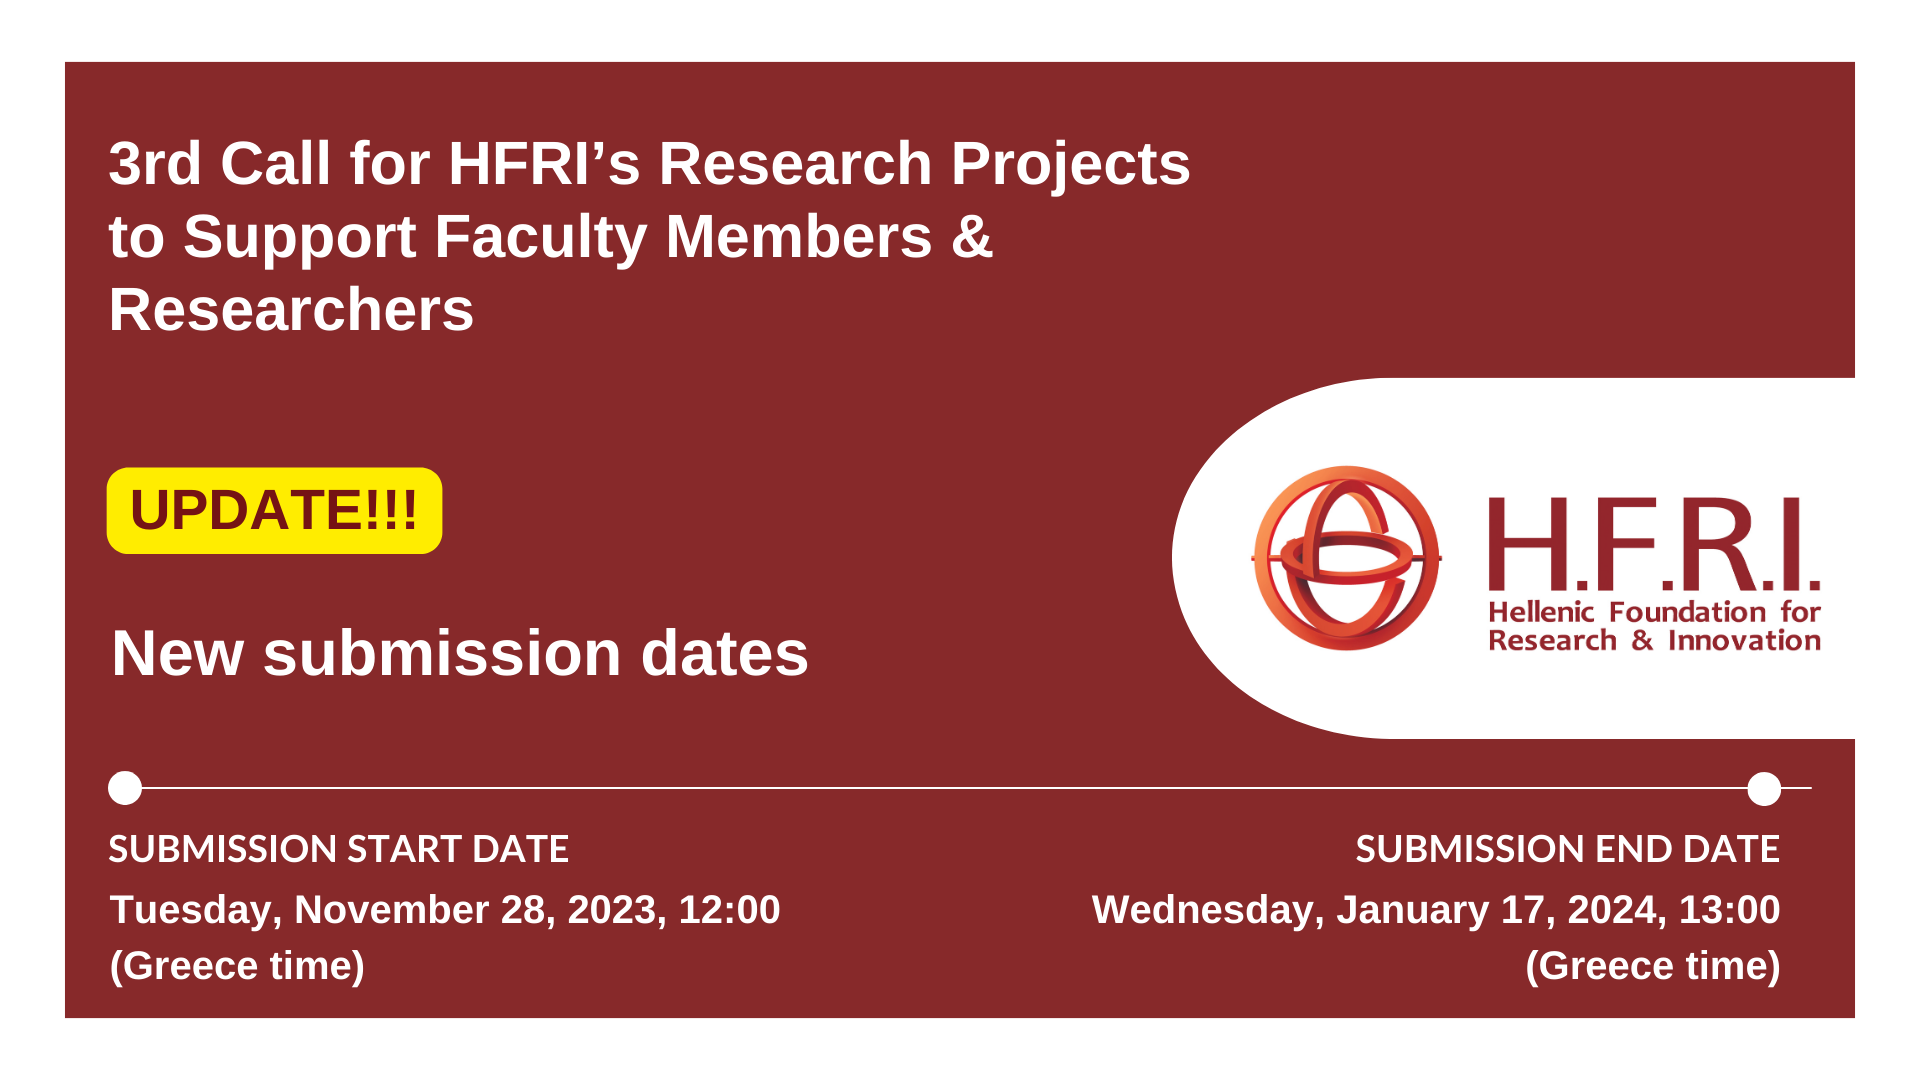 NEW SUBMISSION DATES – 2nd amendment of the “3rd Call for HFRI Research Projects to support Faculty Members and Researchers”